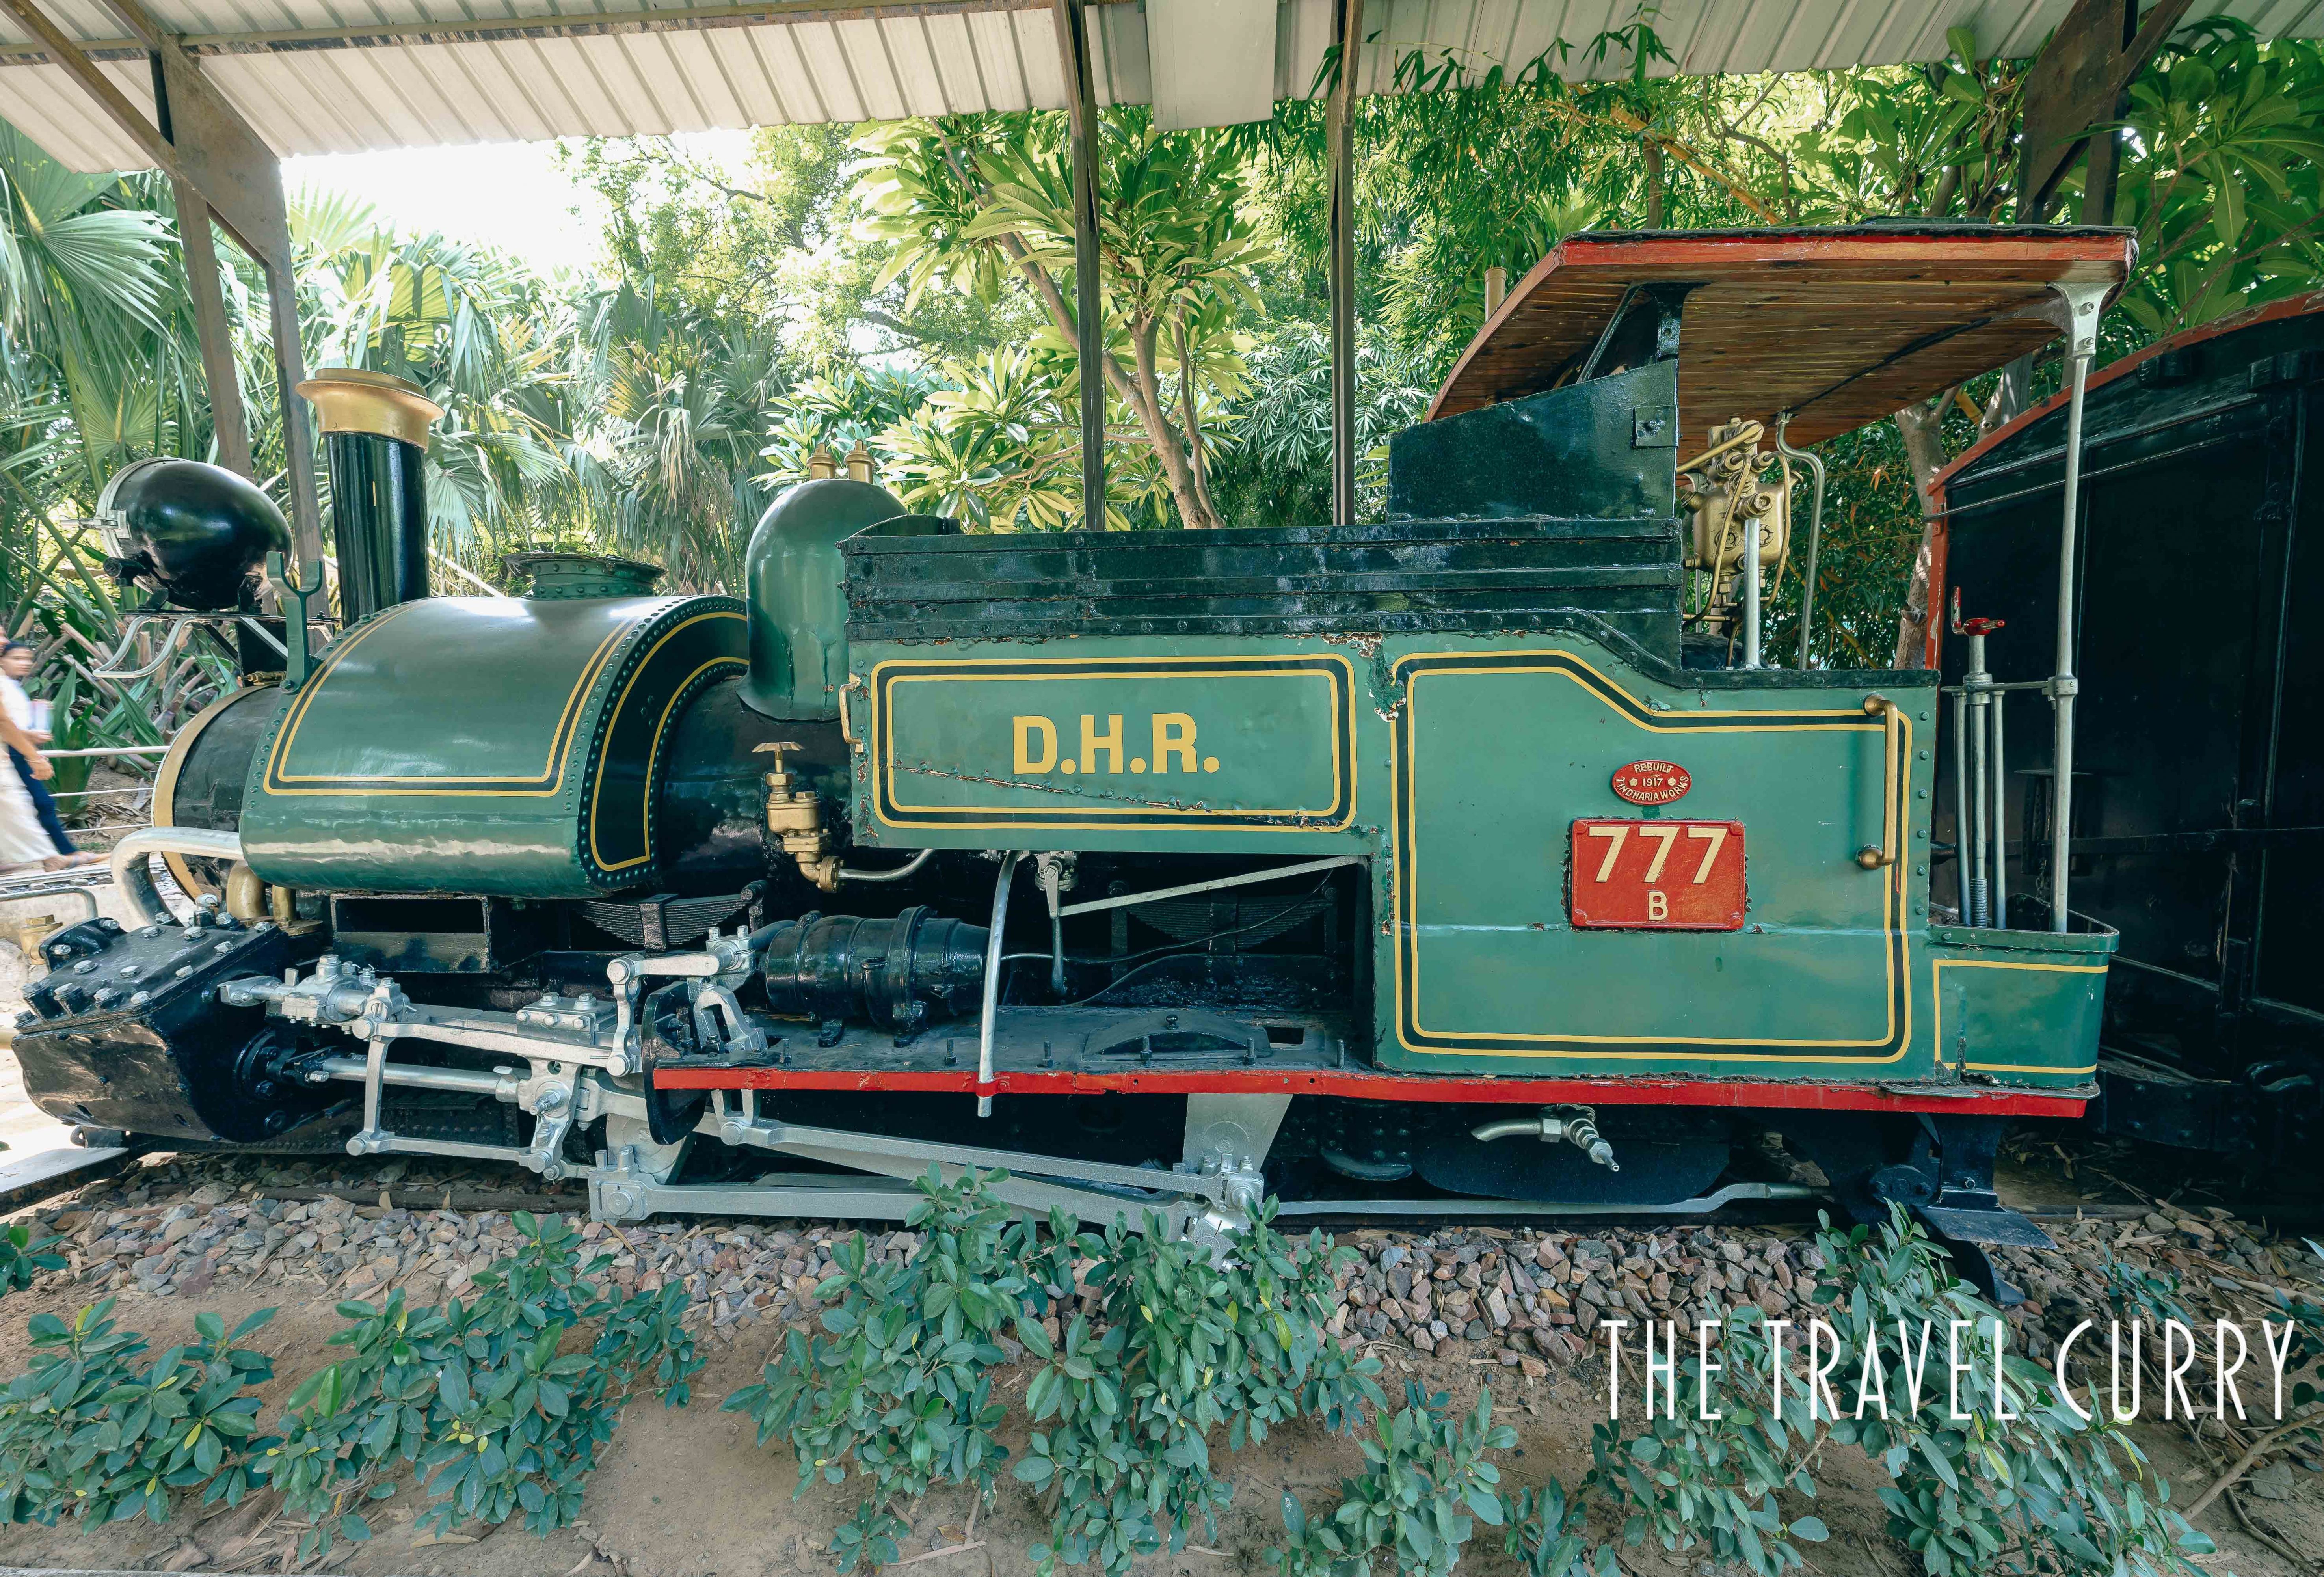 Green steam loco DSH 777 at National Rail Museum